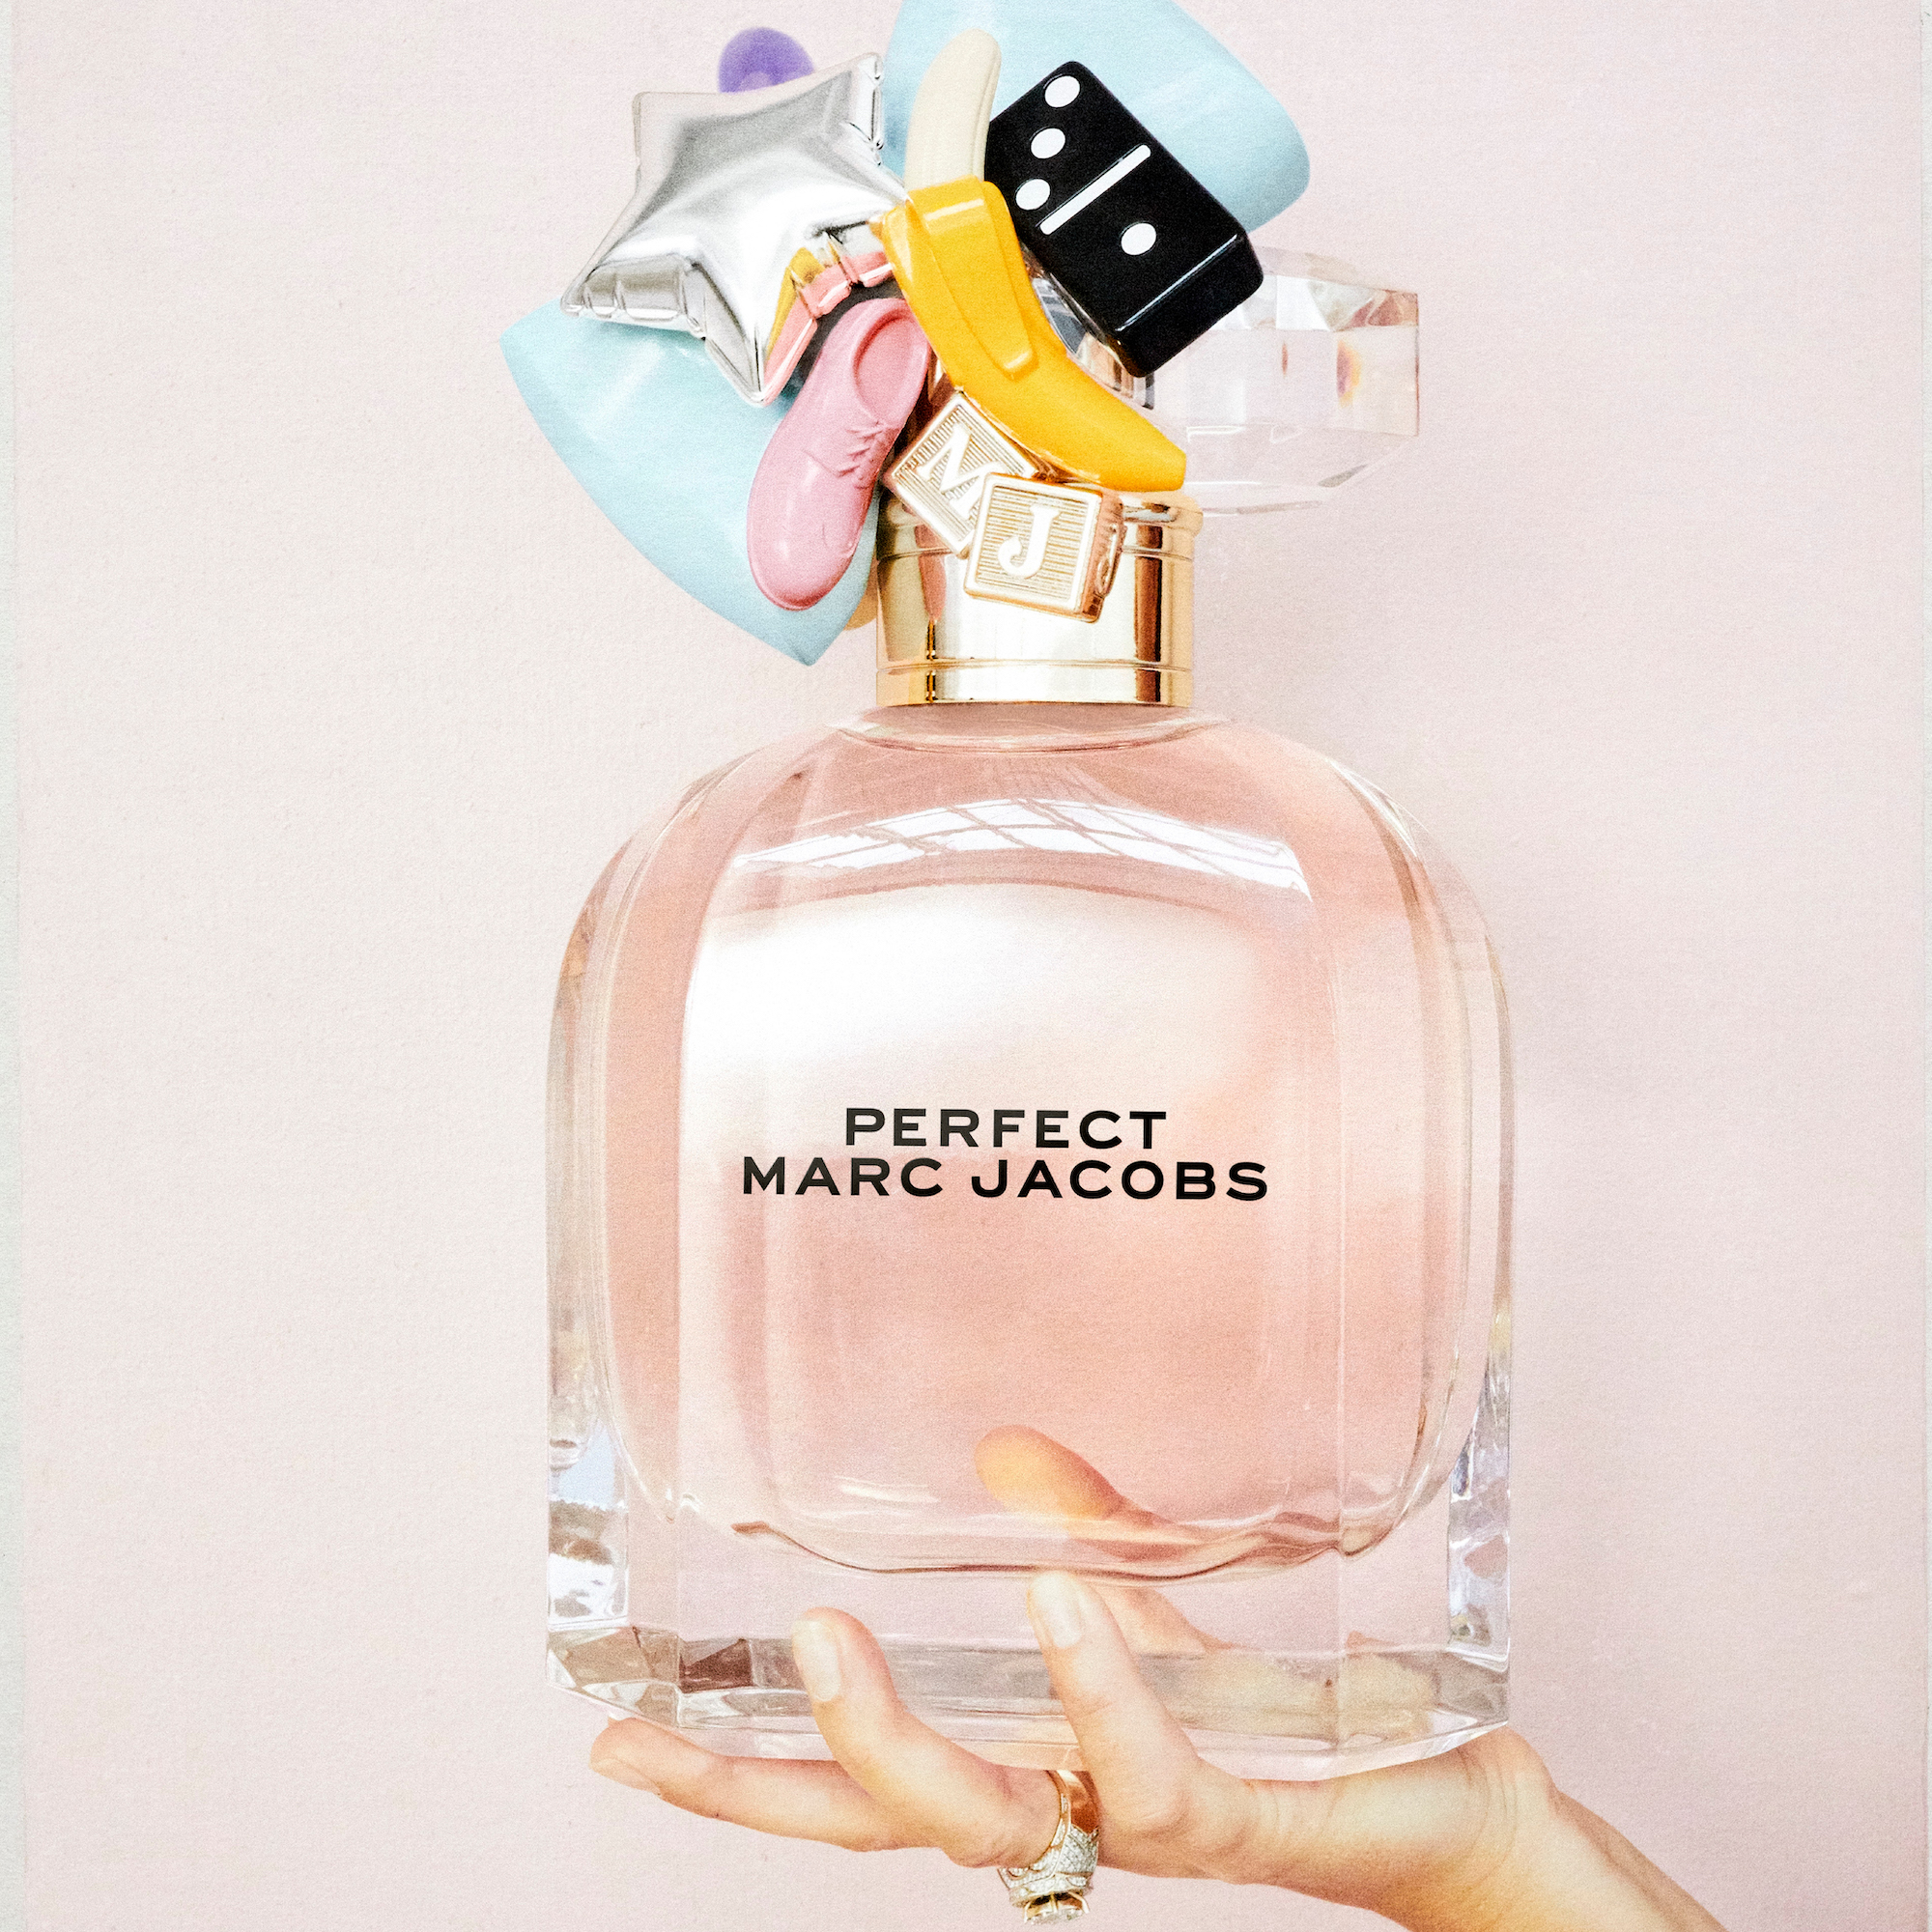 Daisy by Marc Jacobs - Buy online | Perfume.com